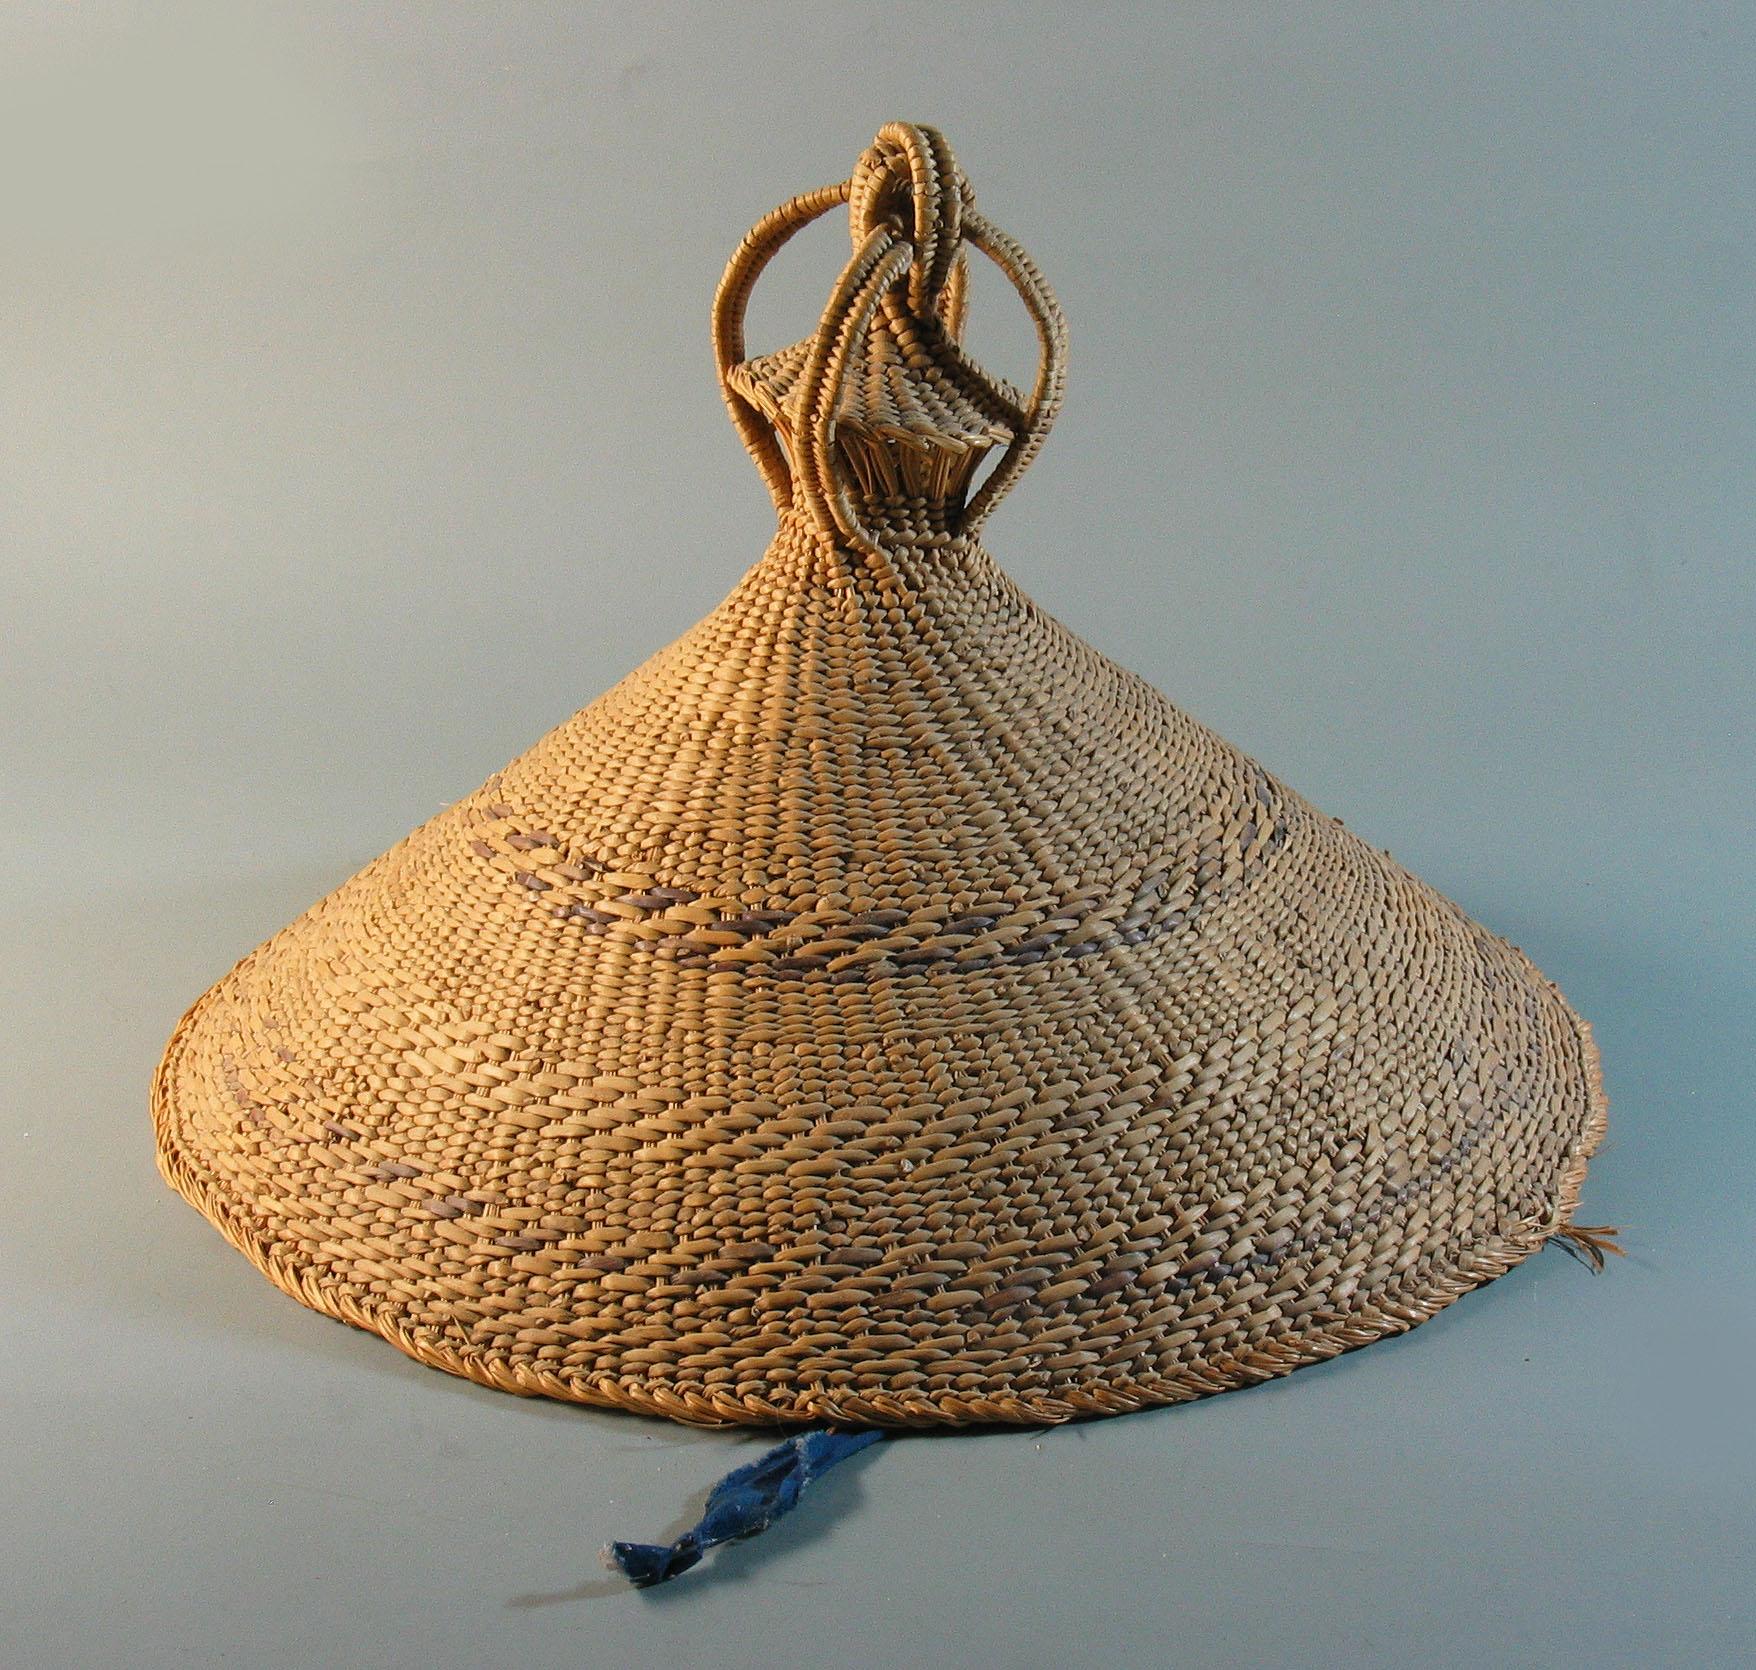 Woven Kuba Ceremonial Raffia Textile Panel with a Hat from Lesotho Tribal Art Drc For Sale